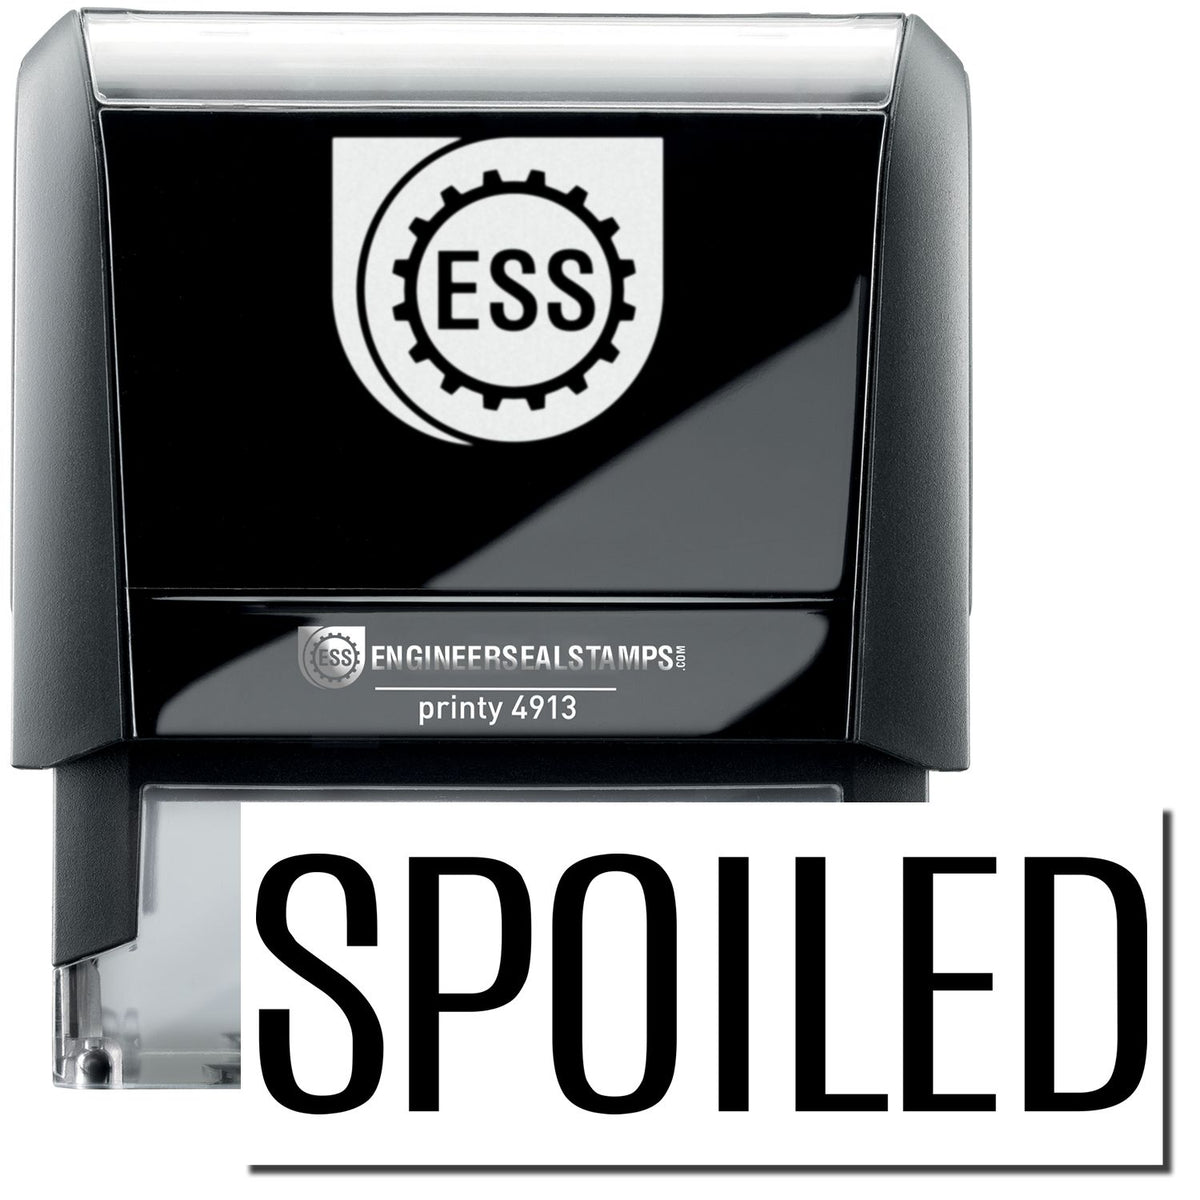 A self-inking stamp with a stamped image showing how the text &quot;SPOILED&quot; in a large font is displayed by it after stamping.